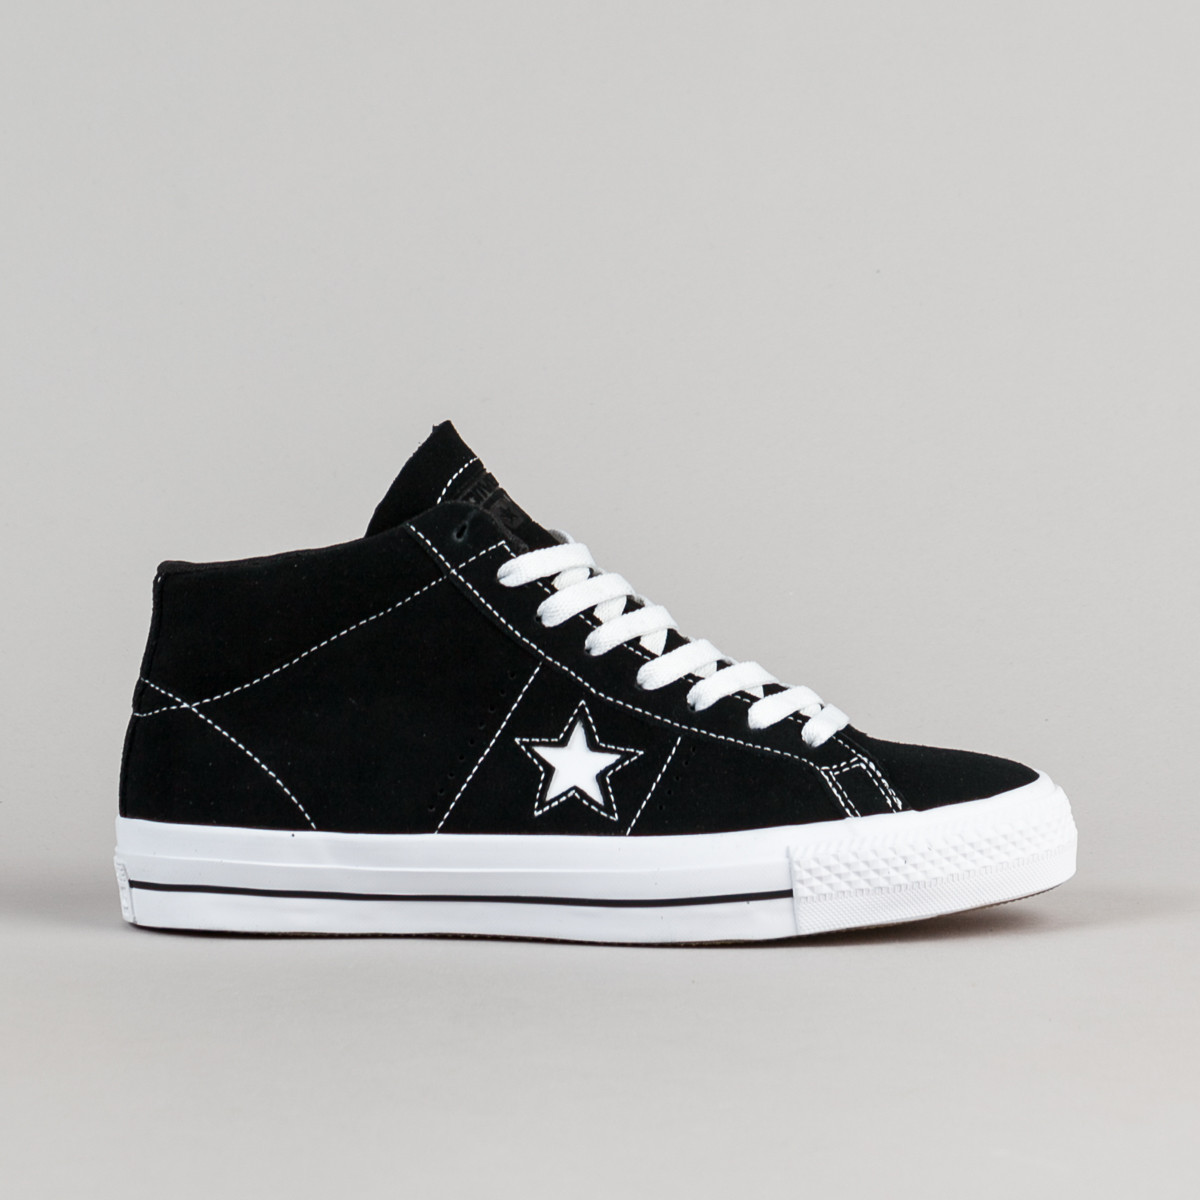 Converse One Star Pro Suede Mid Shoes 